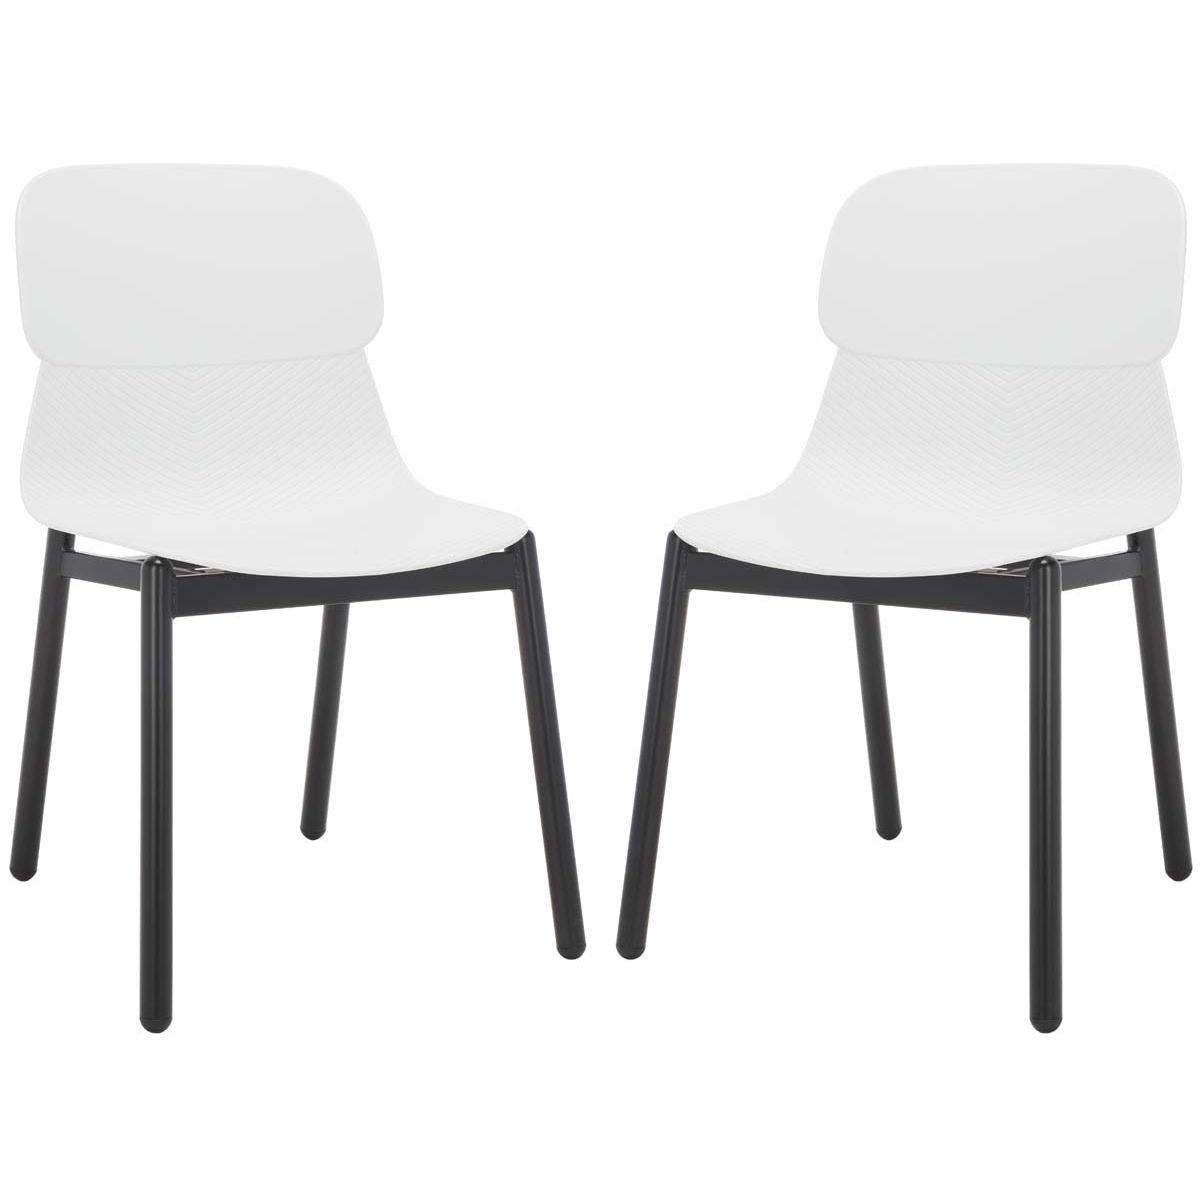 Safavieh Couture Abbie Dining Chairs (Set of 2)